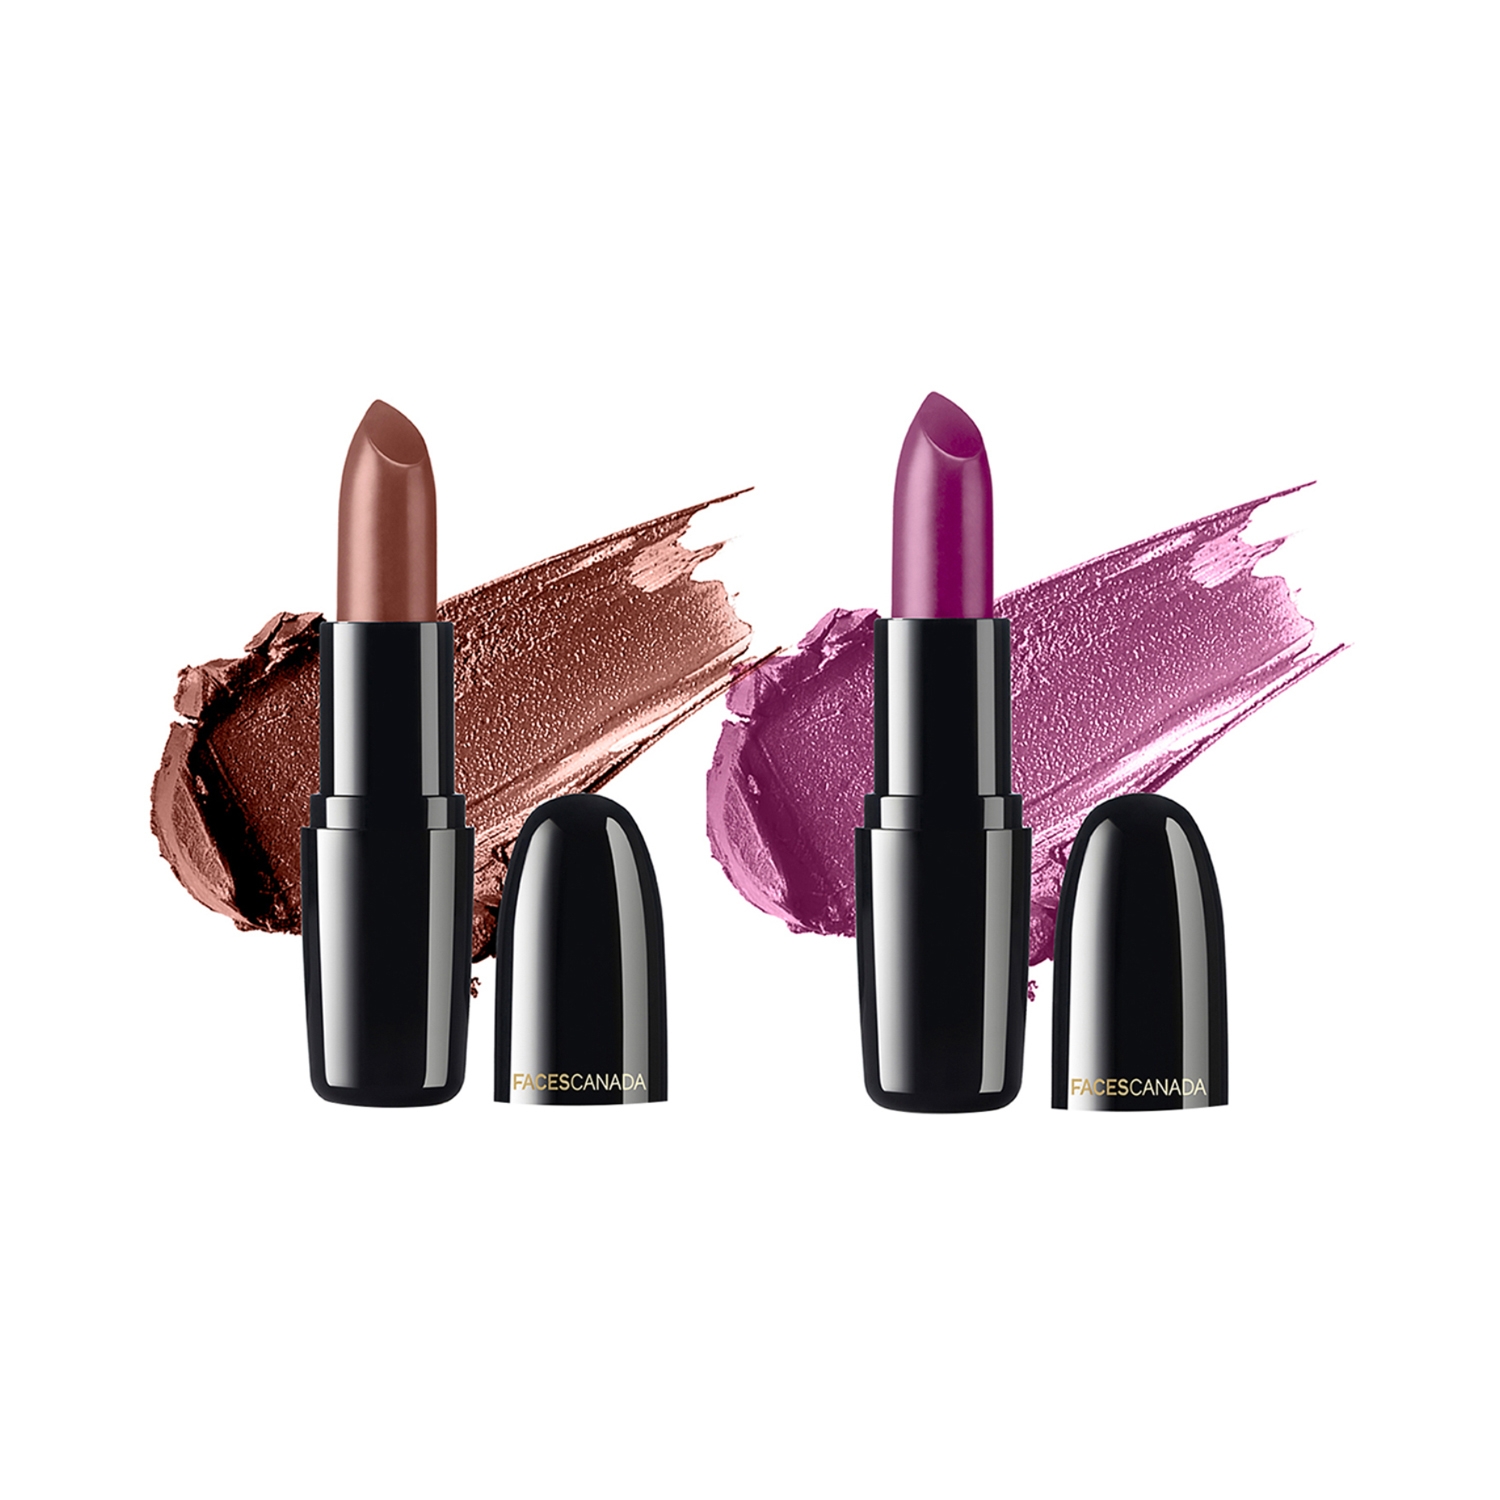 Faces Canada Festive Pout Weightless Creme Lipstick Combo Pack - Sweet Mocha, Imperial Plum (2pcs)